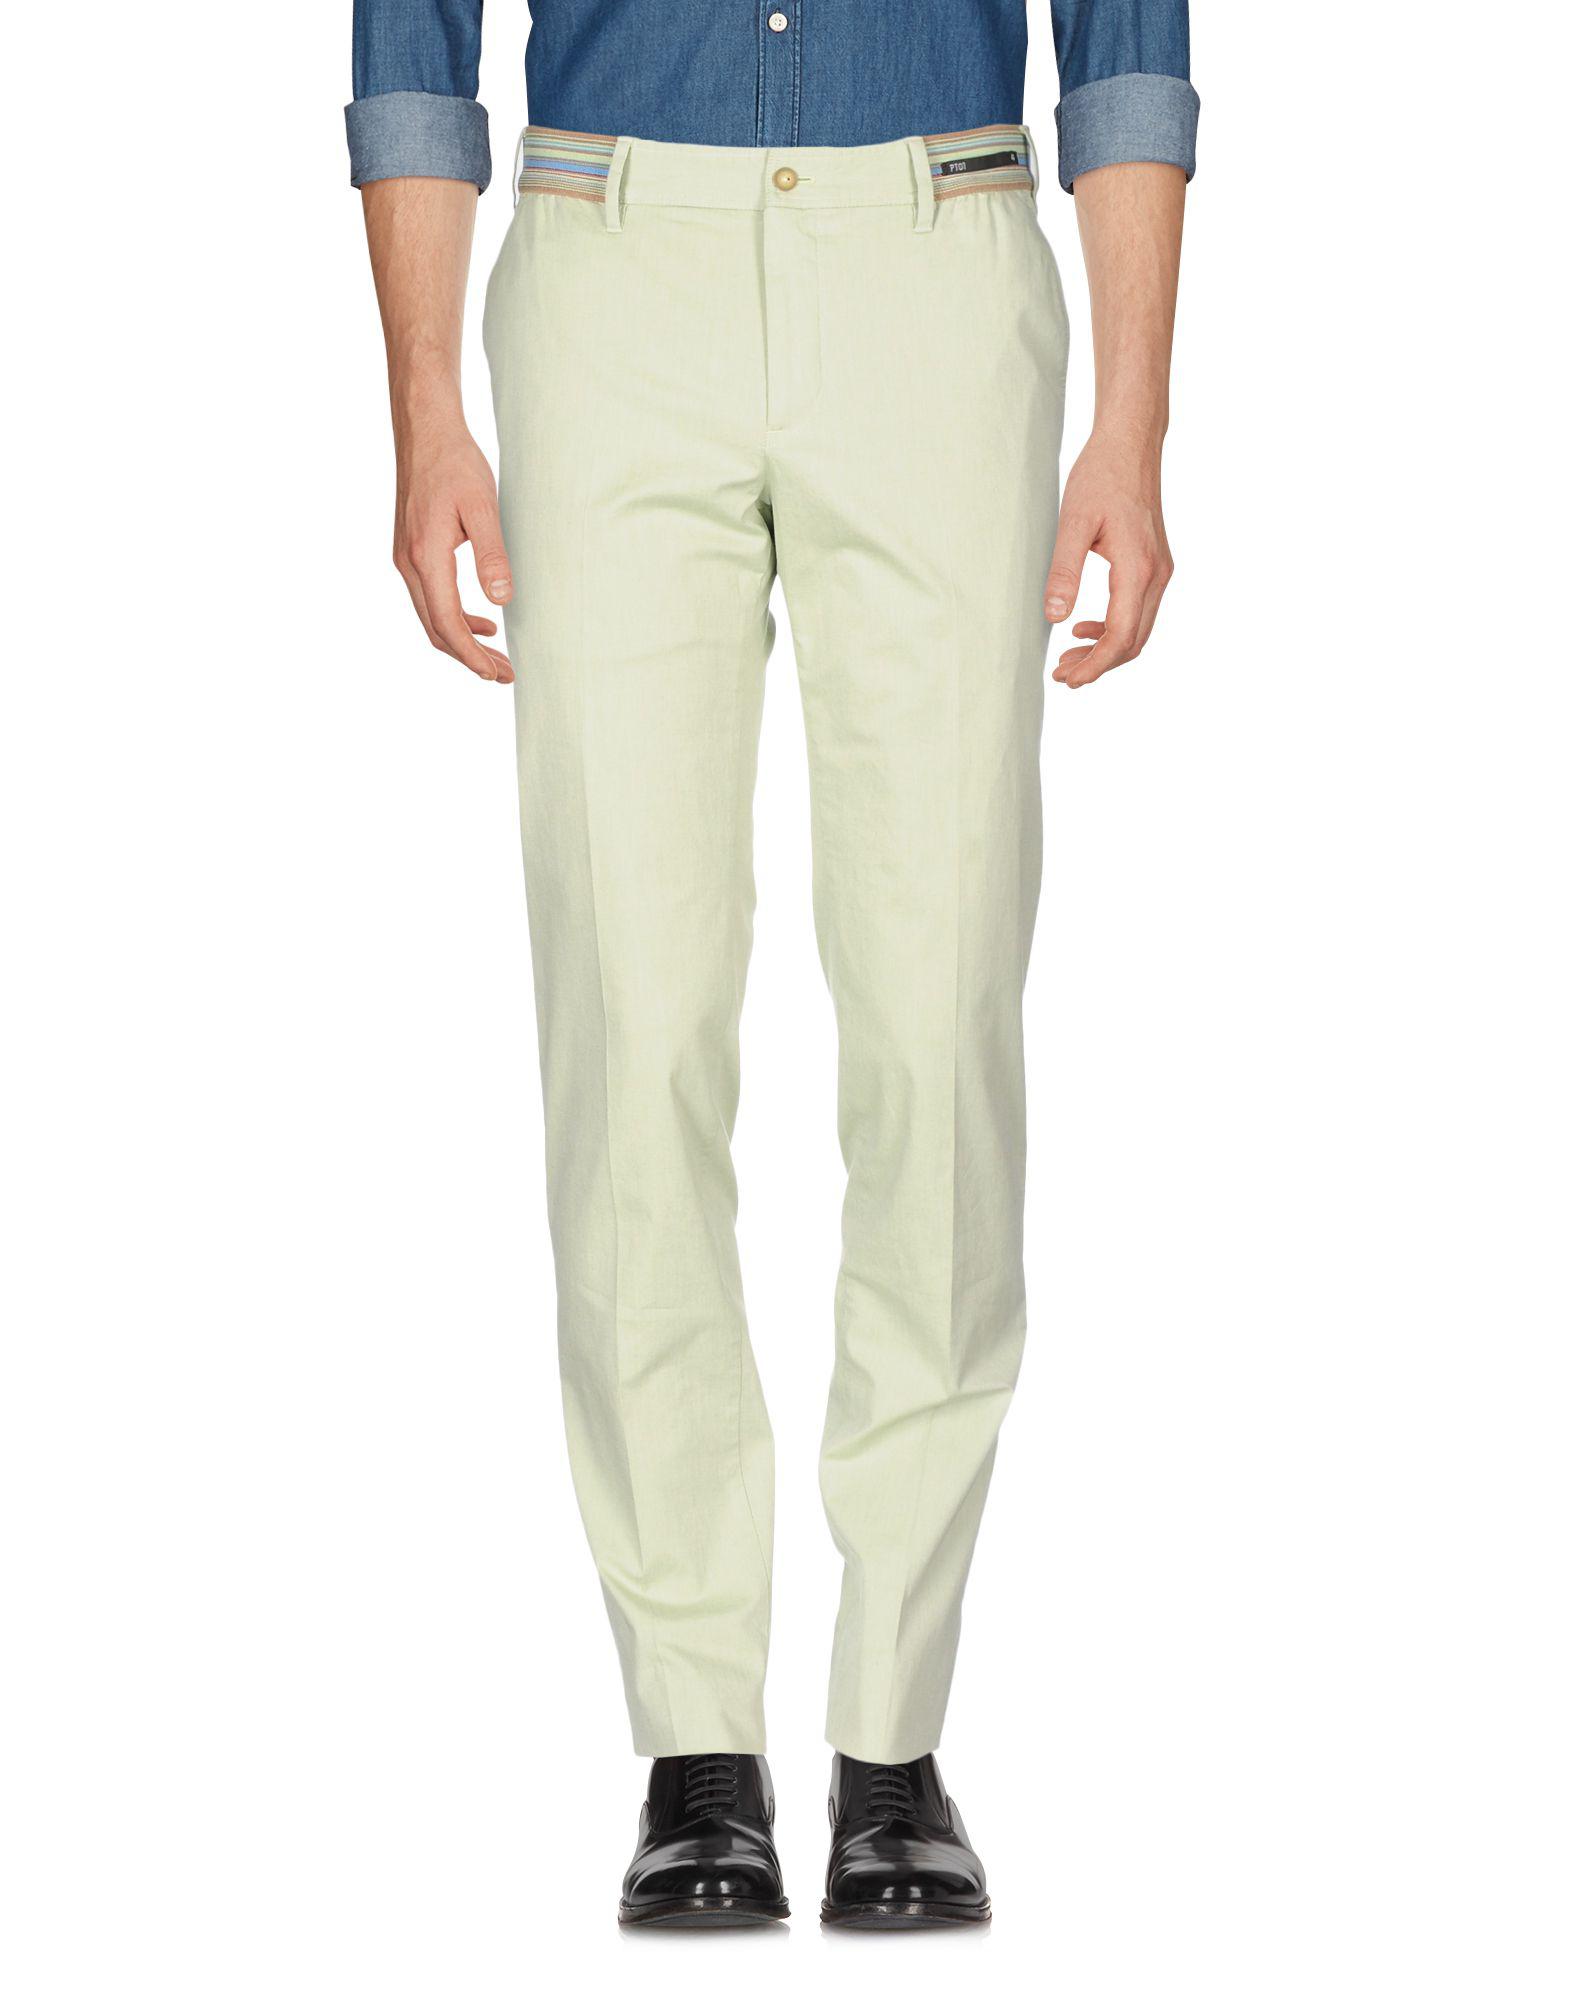 PT01 Cotton Casual Pants in Light Green (Green) for Men - Lyst